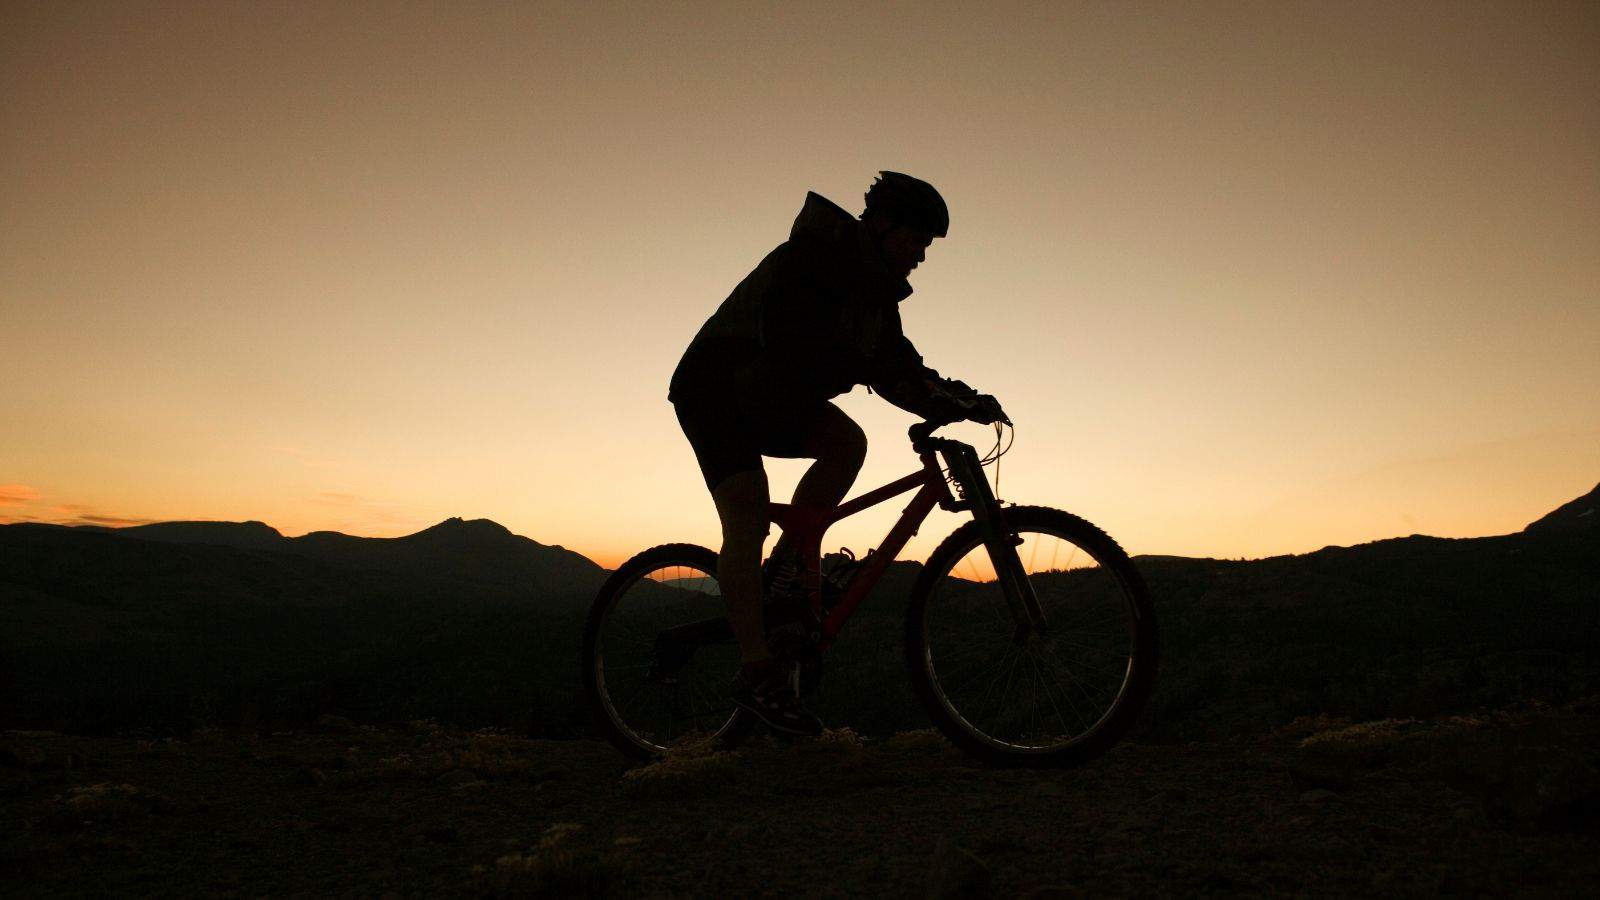 15 Reasons Biking Is Perfect for Better Health